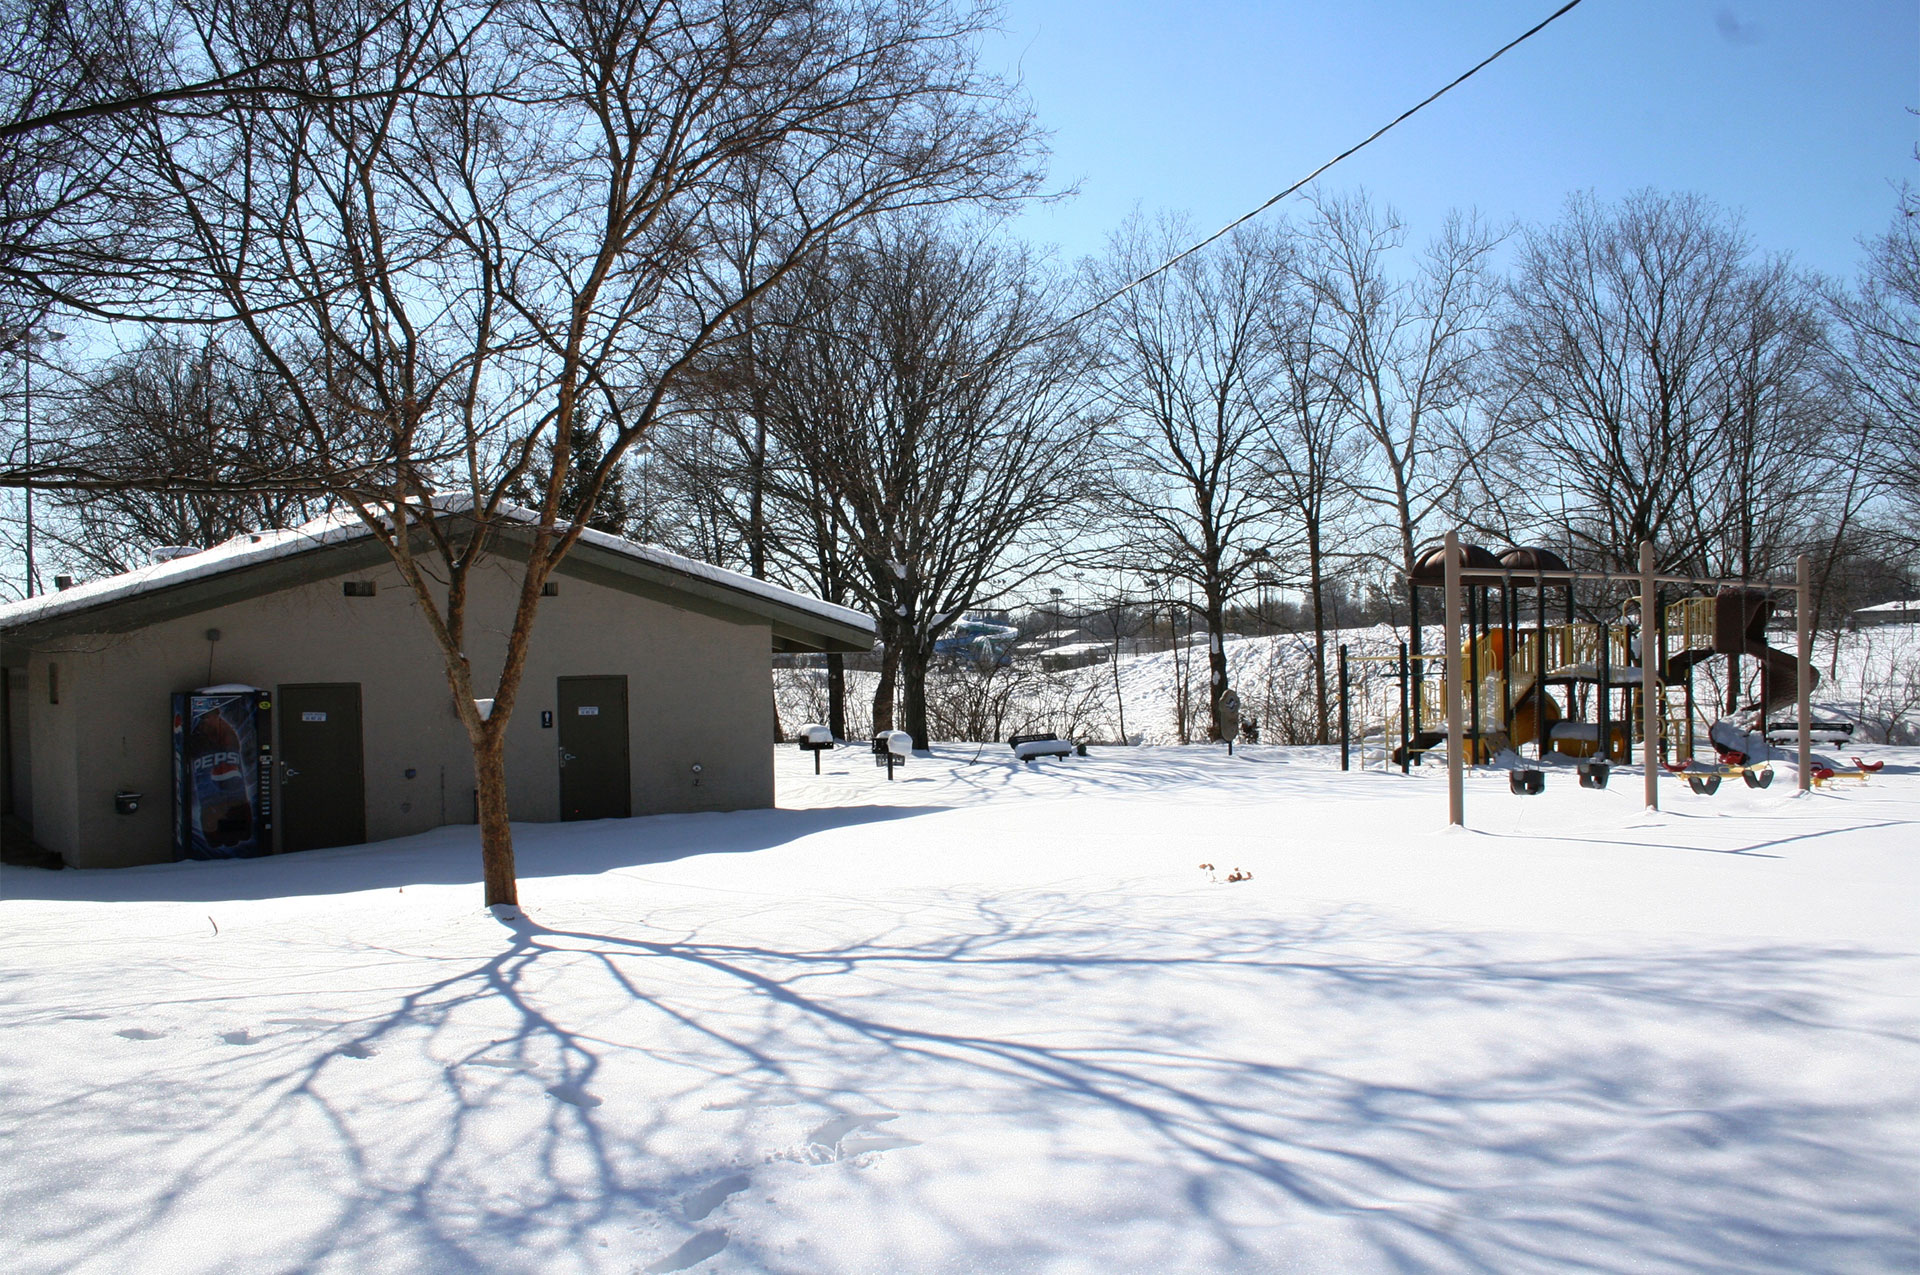 Reed Road Shelter Winter Playground